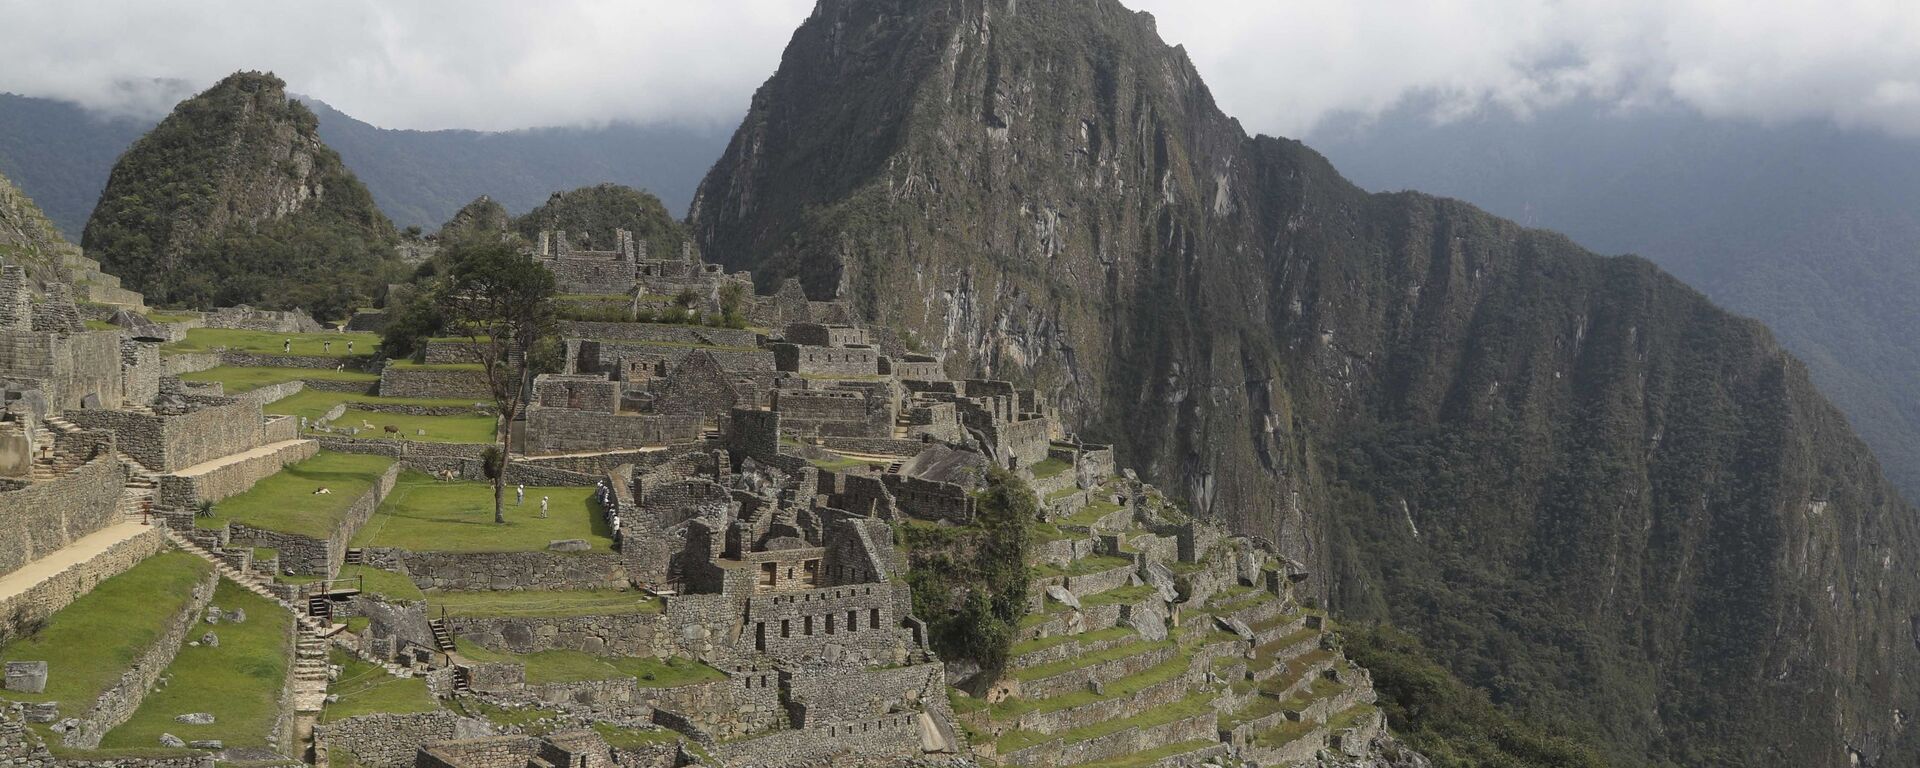 The Machu Picchu archeological site is devoid of tourists while it's closed amid the COVID-19 pandemic, in the department of Cusco, Peru, Tuesday, Oct. 27, 2020. Currently open to maintenance workers only, the world-renown Incan citadel of Machu Picchu will reopen to the public on Nov. 1. (AP Photo/Martin Mejia) - Sputnik International, 1920, 02.11.2020